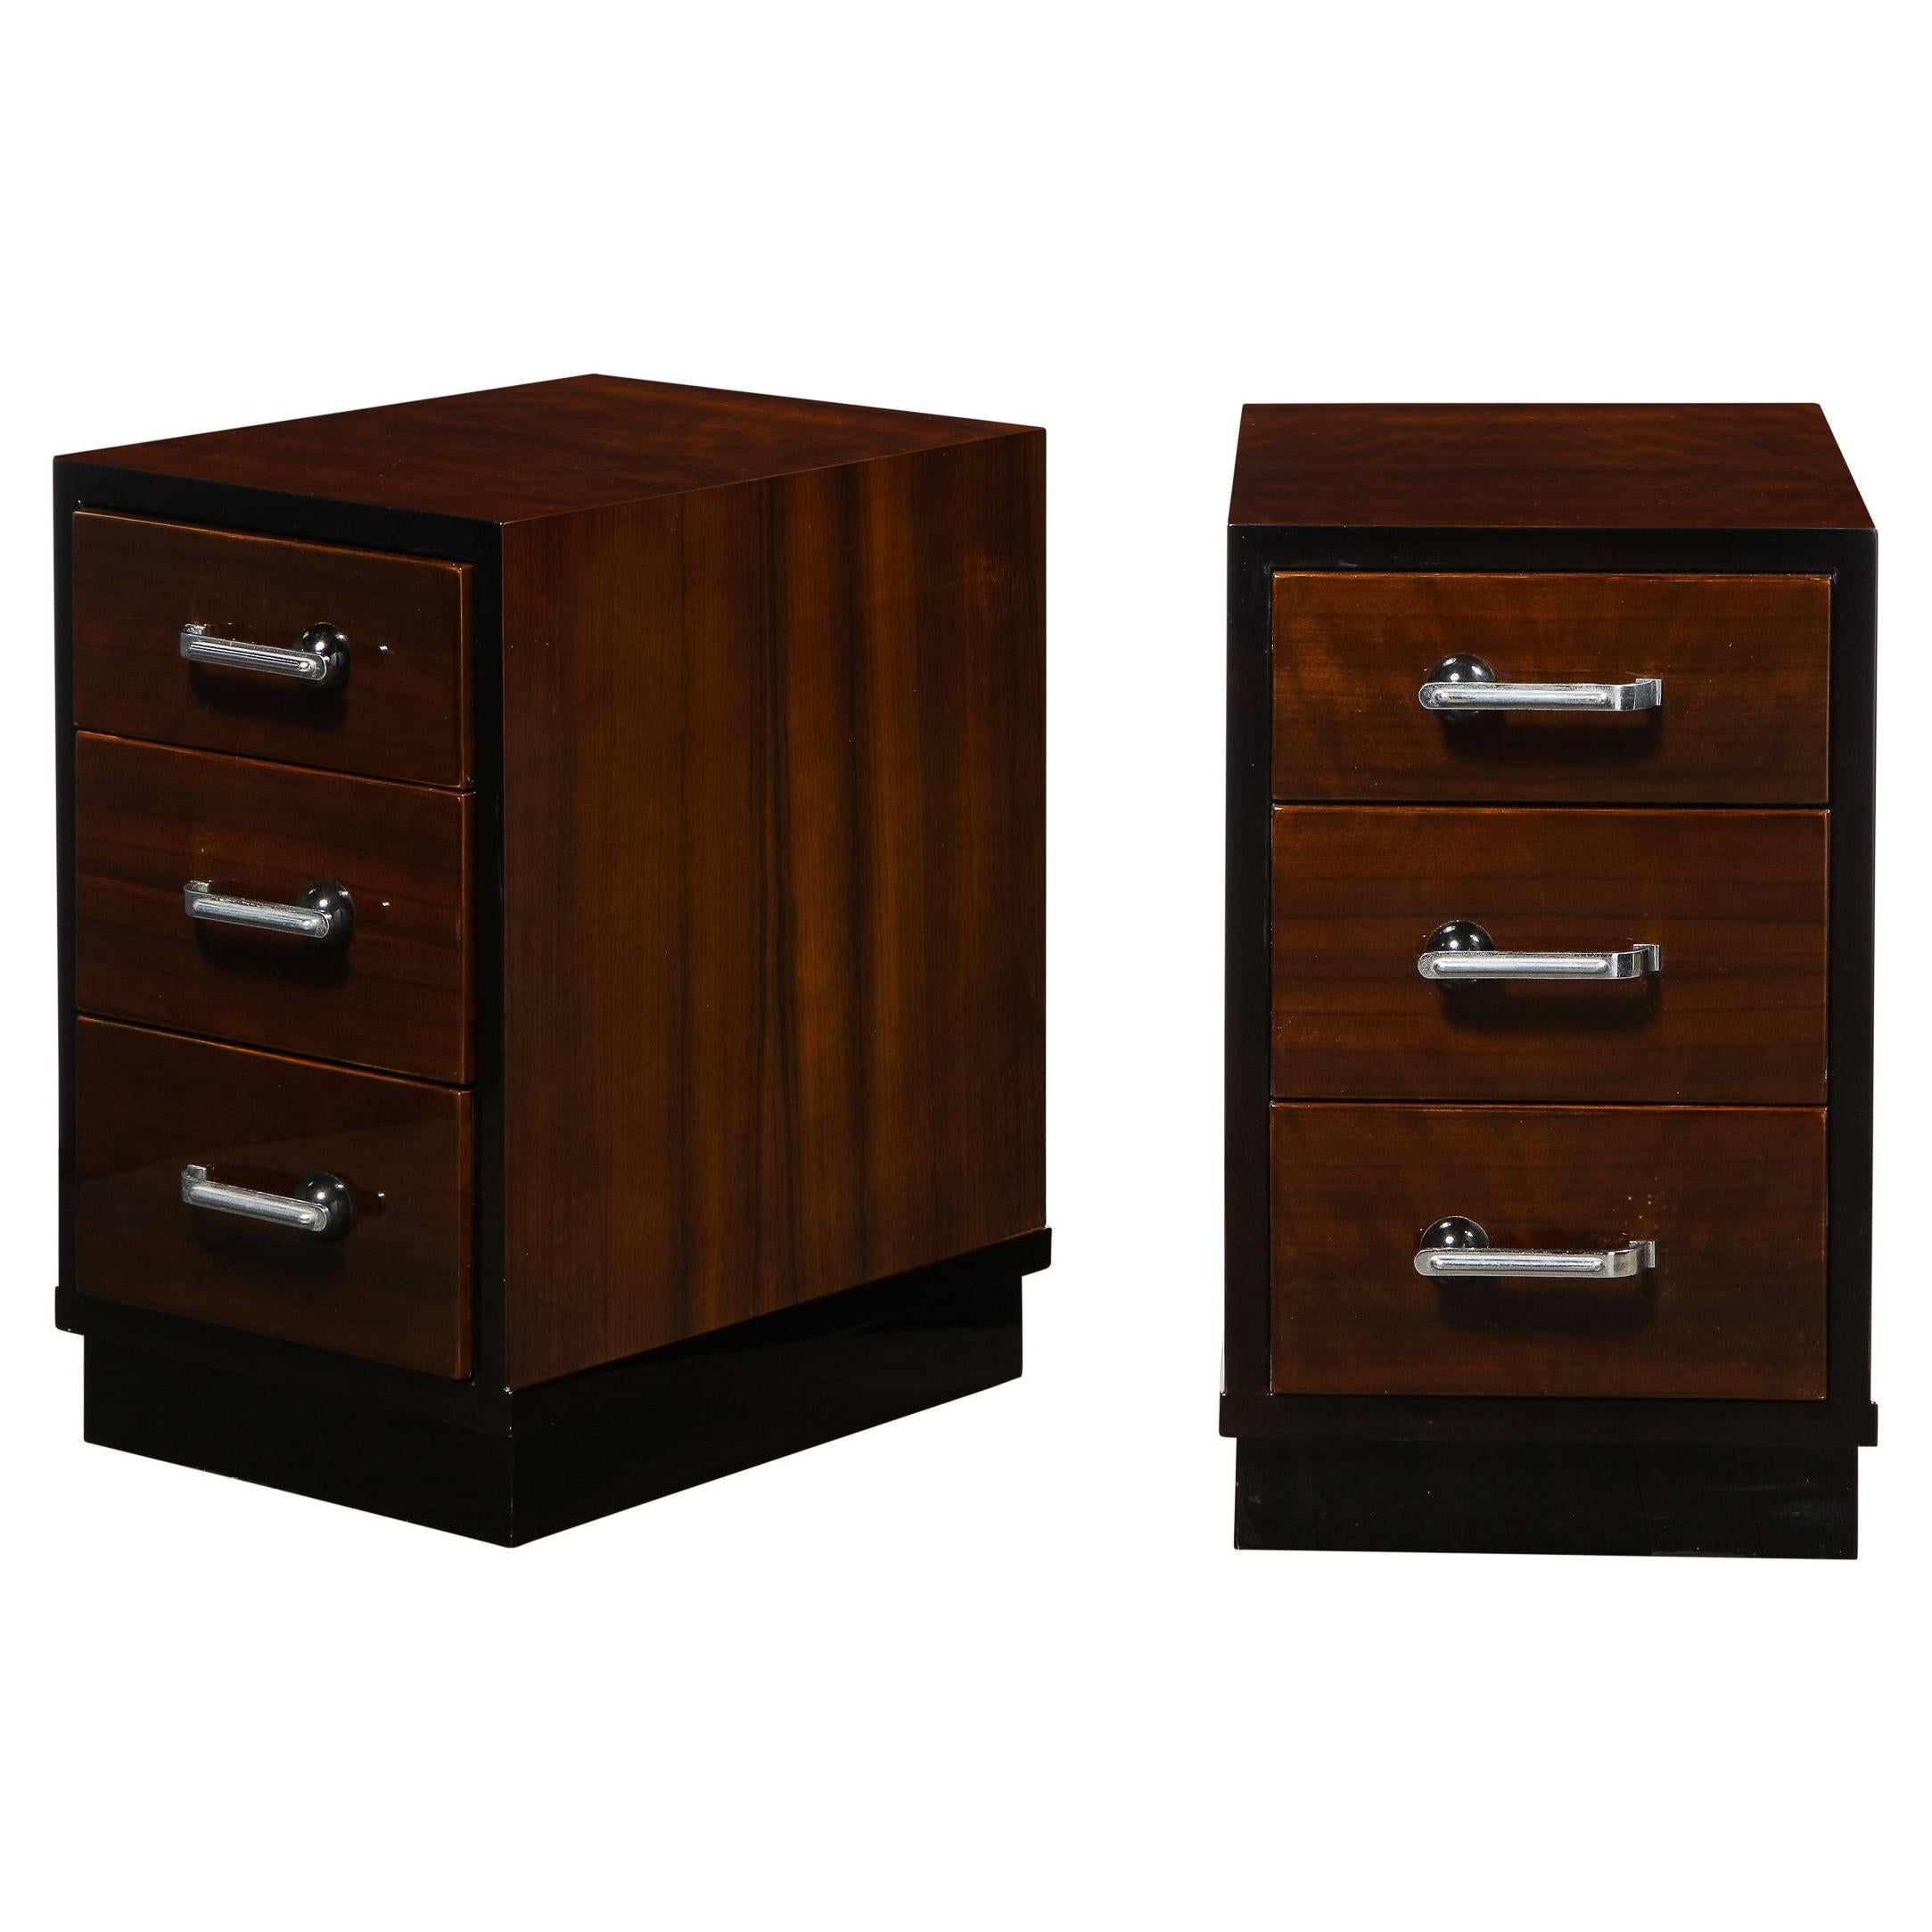 Pair of Art Deco Nightstands in Lacquer & Walnut w/ Streamlined Chrome Pulls